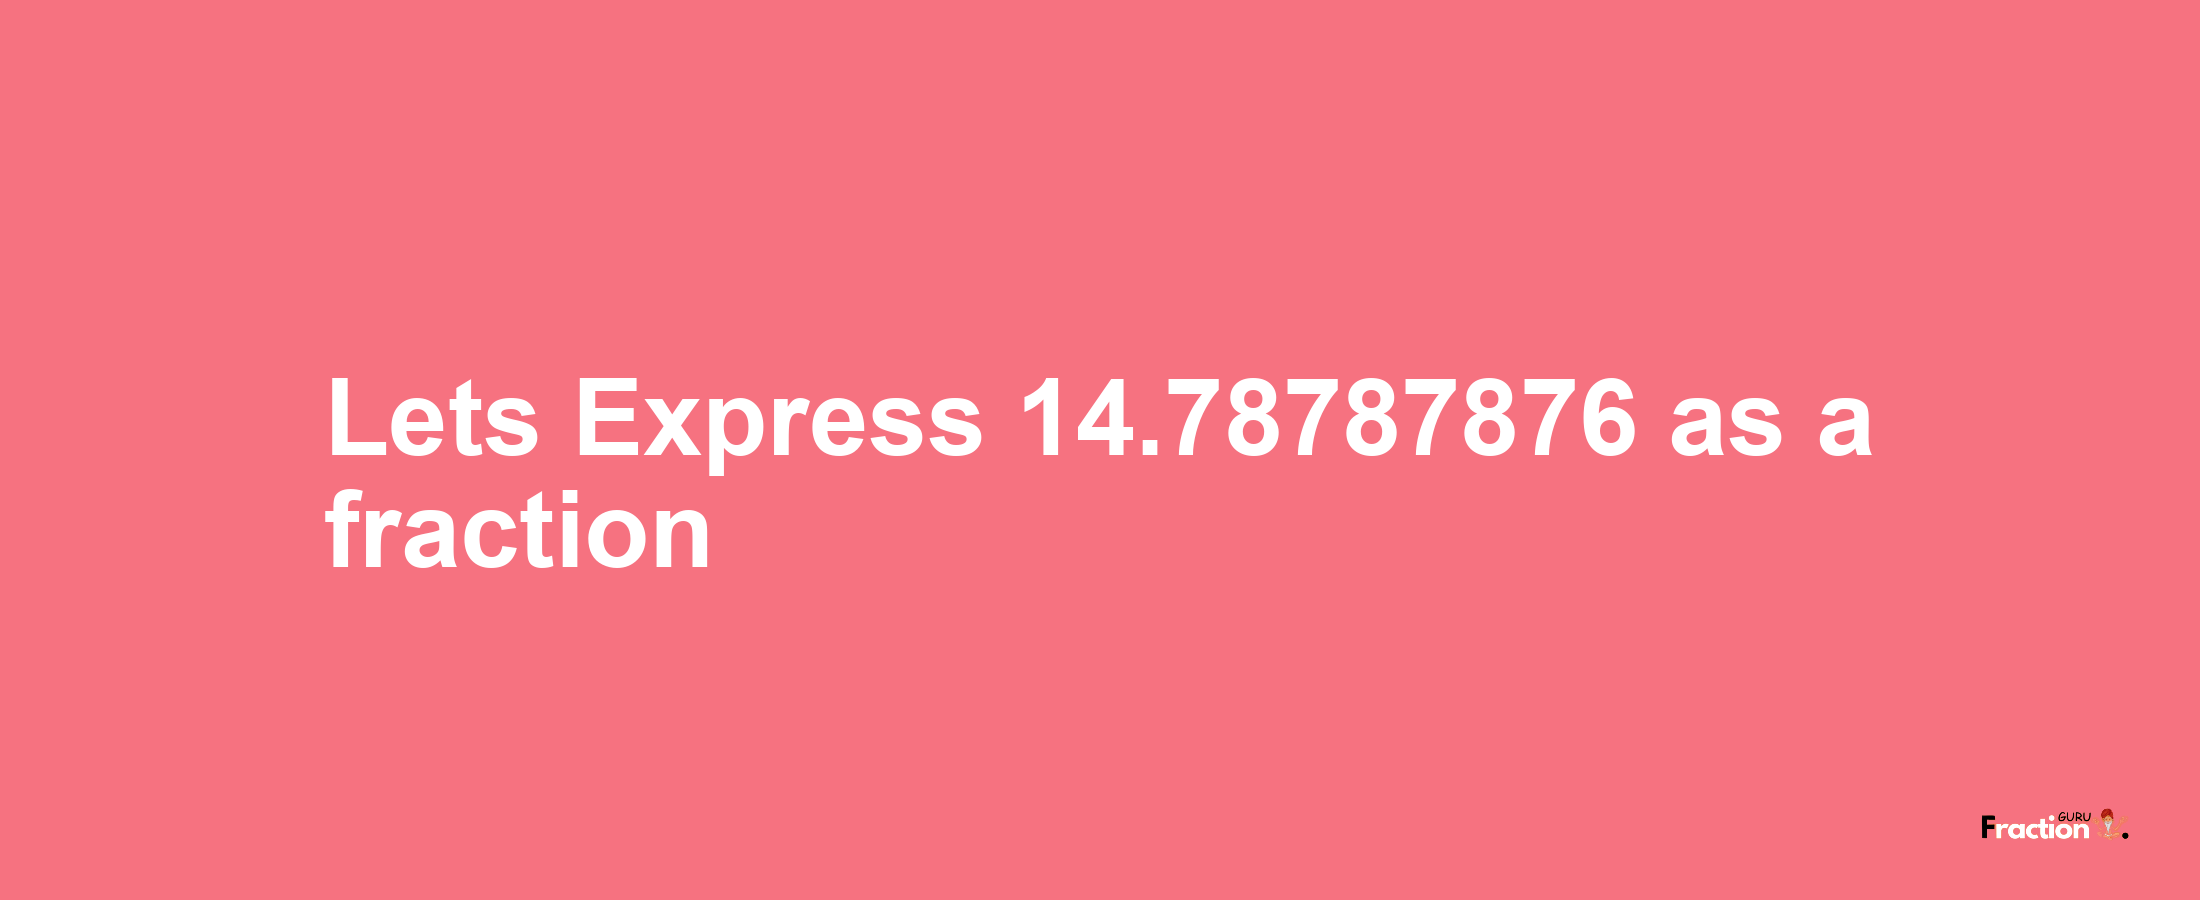 Lets Express 14.78787876 as afraction